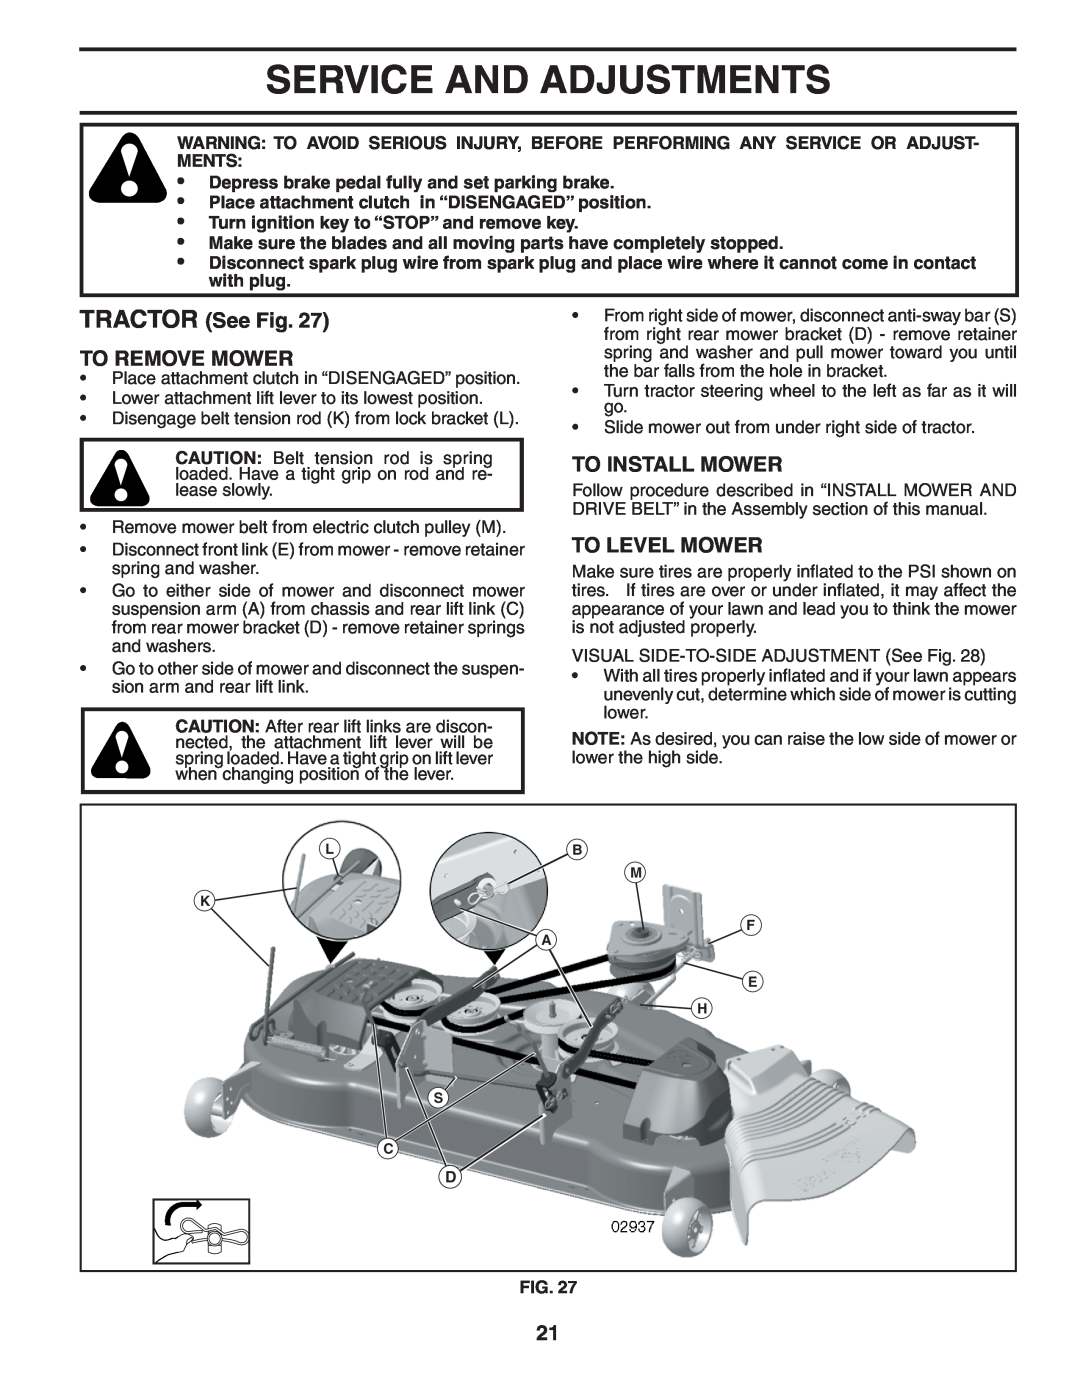 Husqvarna GTH2454T owner manual Service And Adjustments, TRACTOR See Fig TO REMOVE MOWER, To Install Mower, To Level Mower 